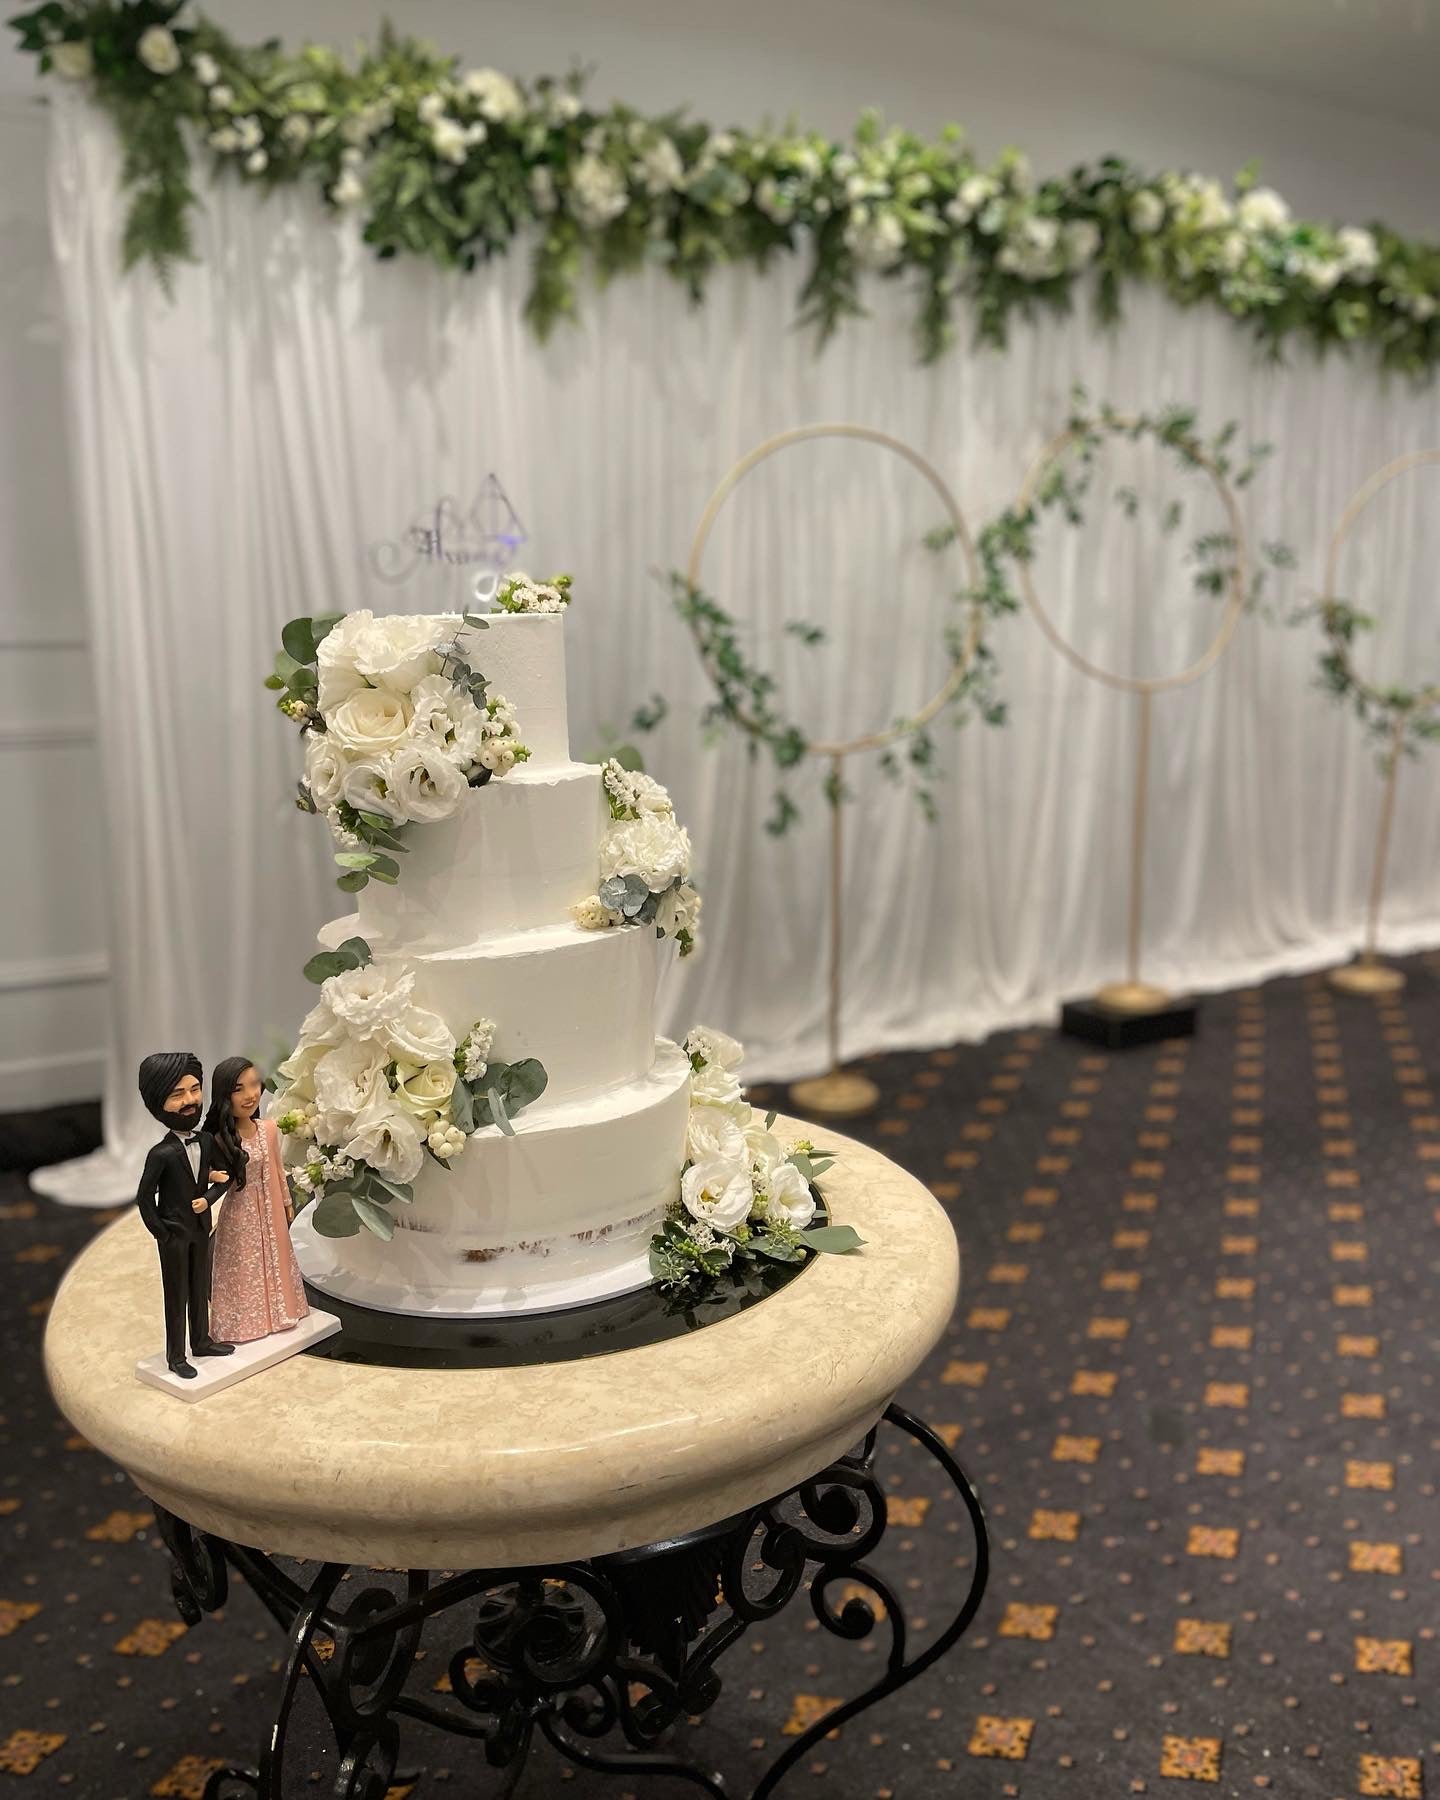 4 Tier Semi Naked with White Flowers